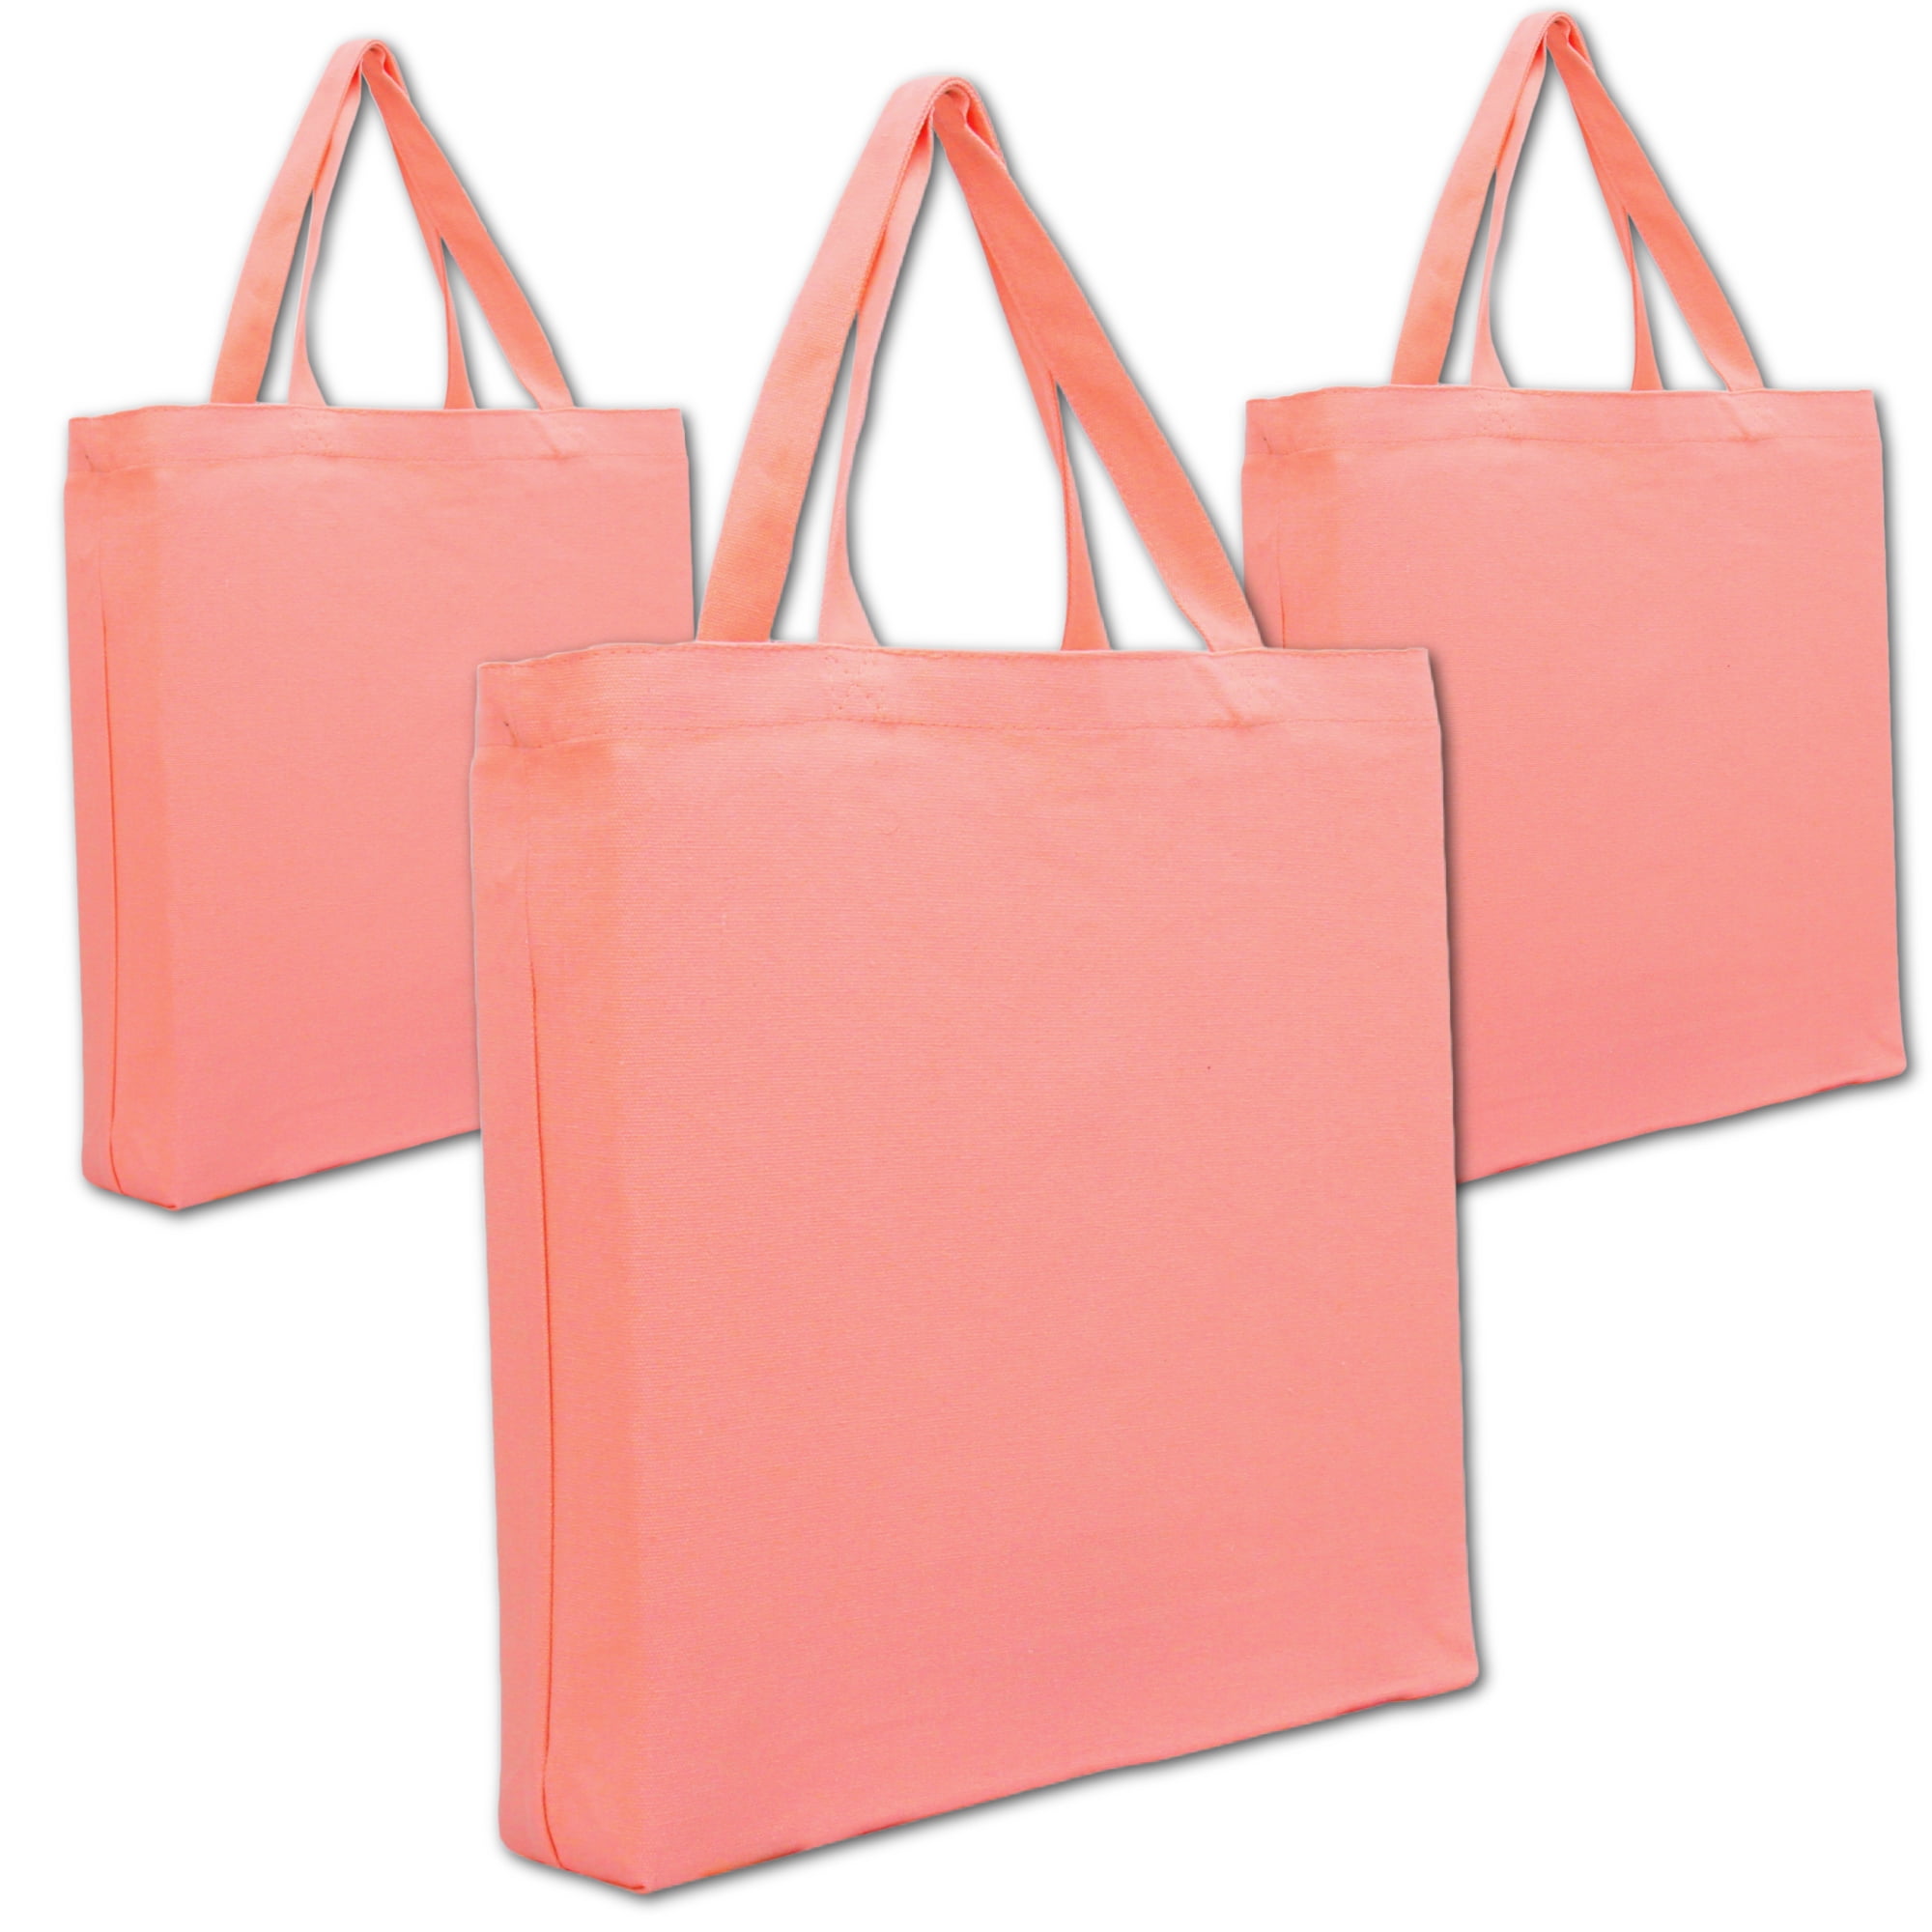 3Pcs/Lot Ready To Ship Natural Color Cotton Canvas Tote Bag with